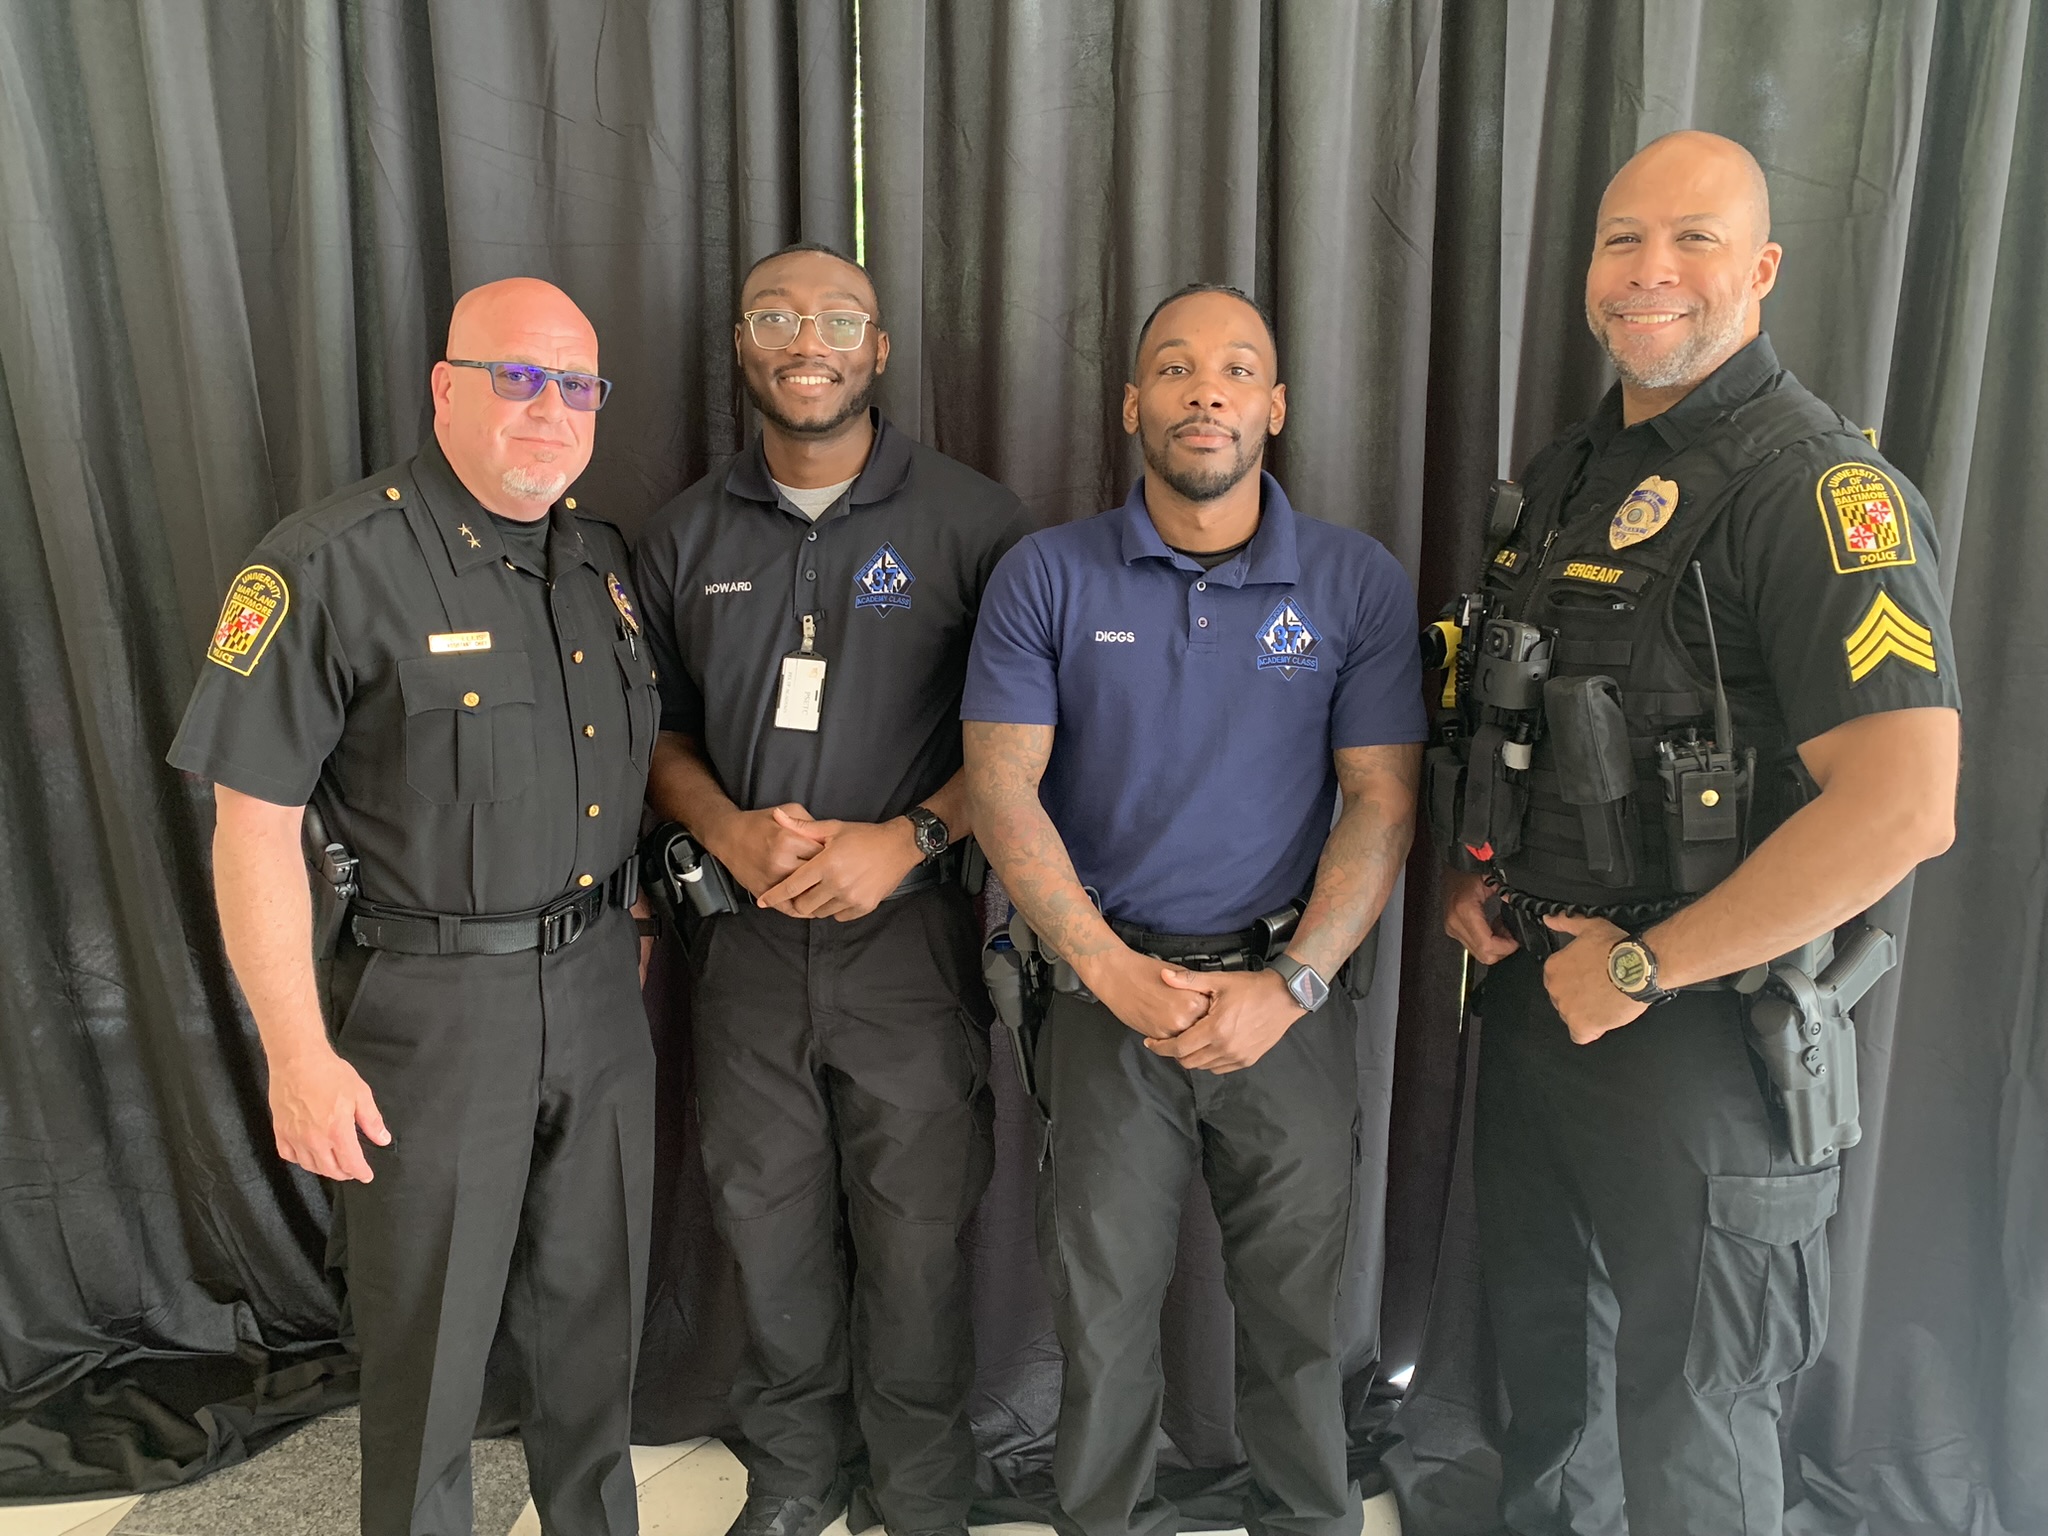 Assistant Chief Chad Ellis, recruit Stephen Howard, recruit Mikal Diggs, and Sgt. Thaddeus Baker